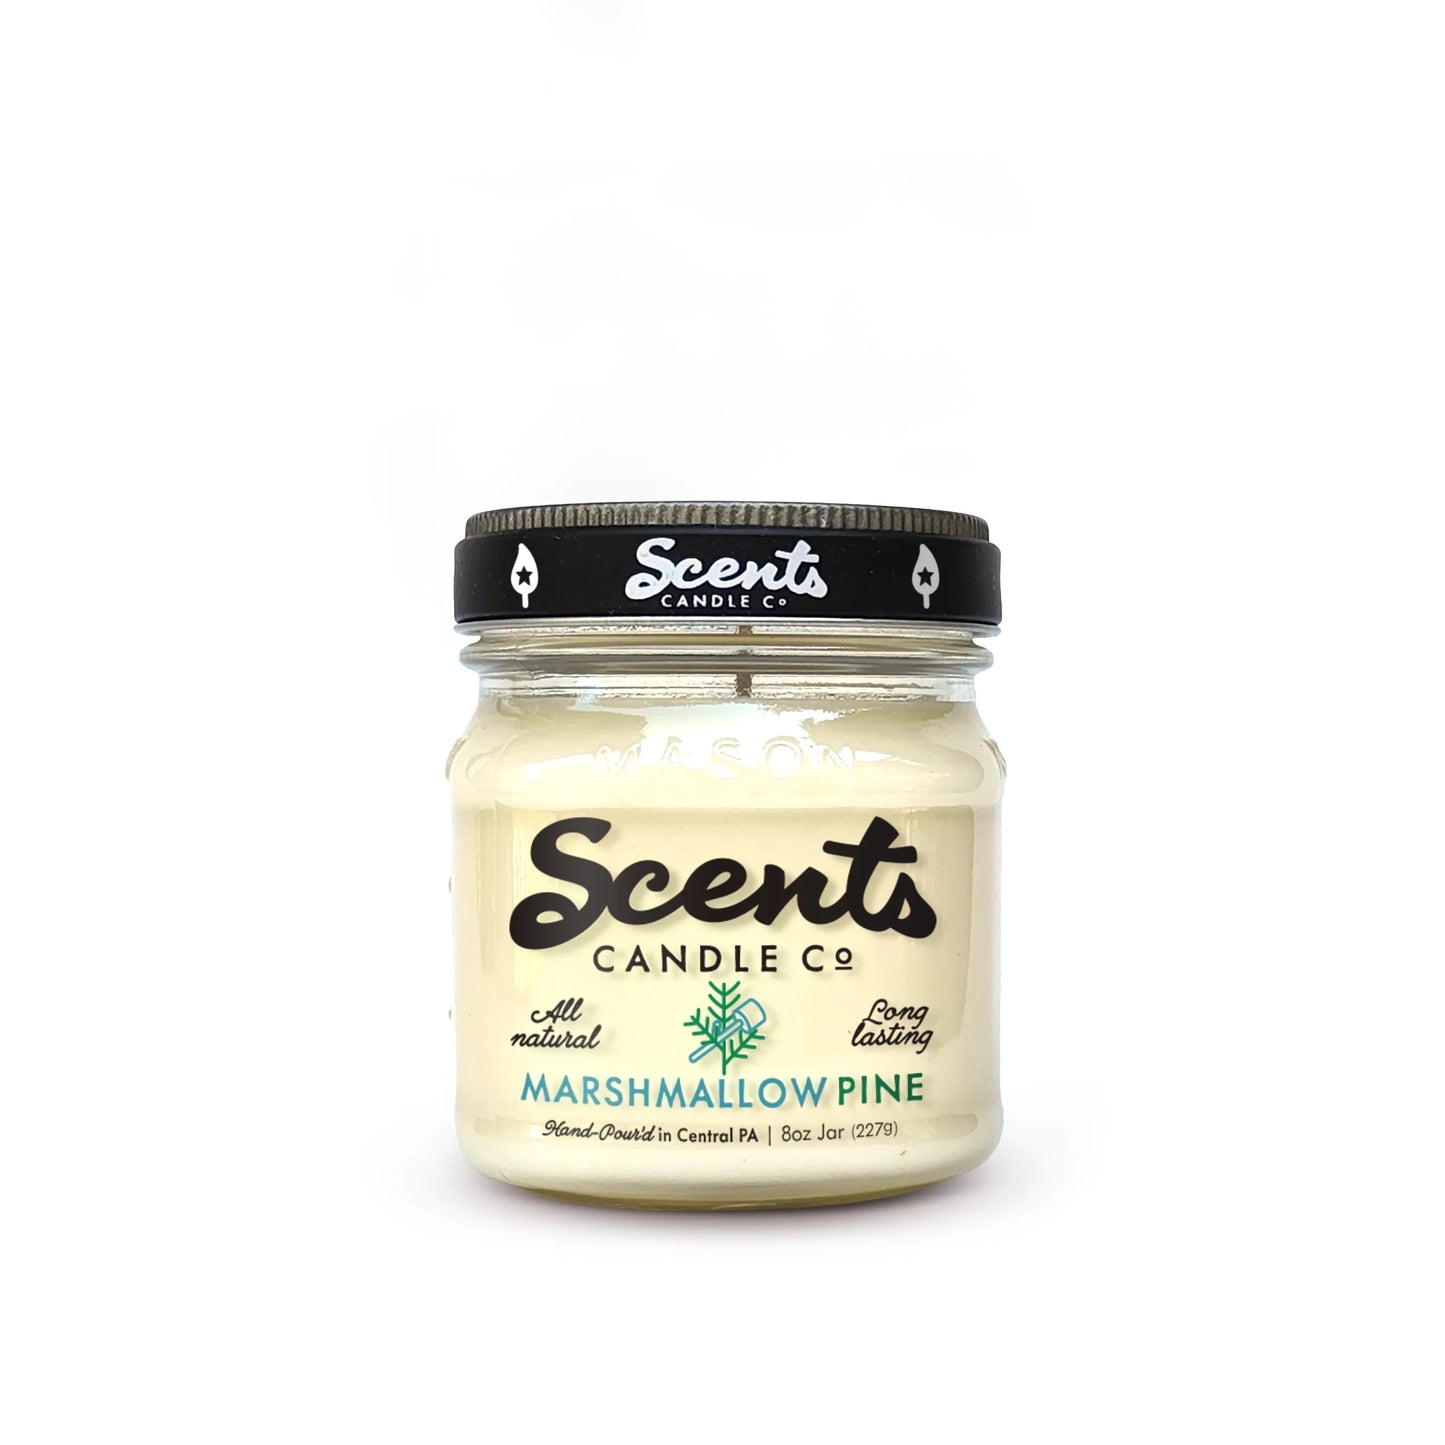 Scents Candle Co. Marshmallow Pine Soy Wax Candles